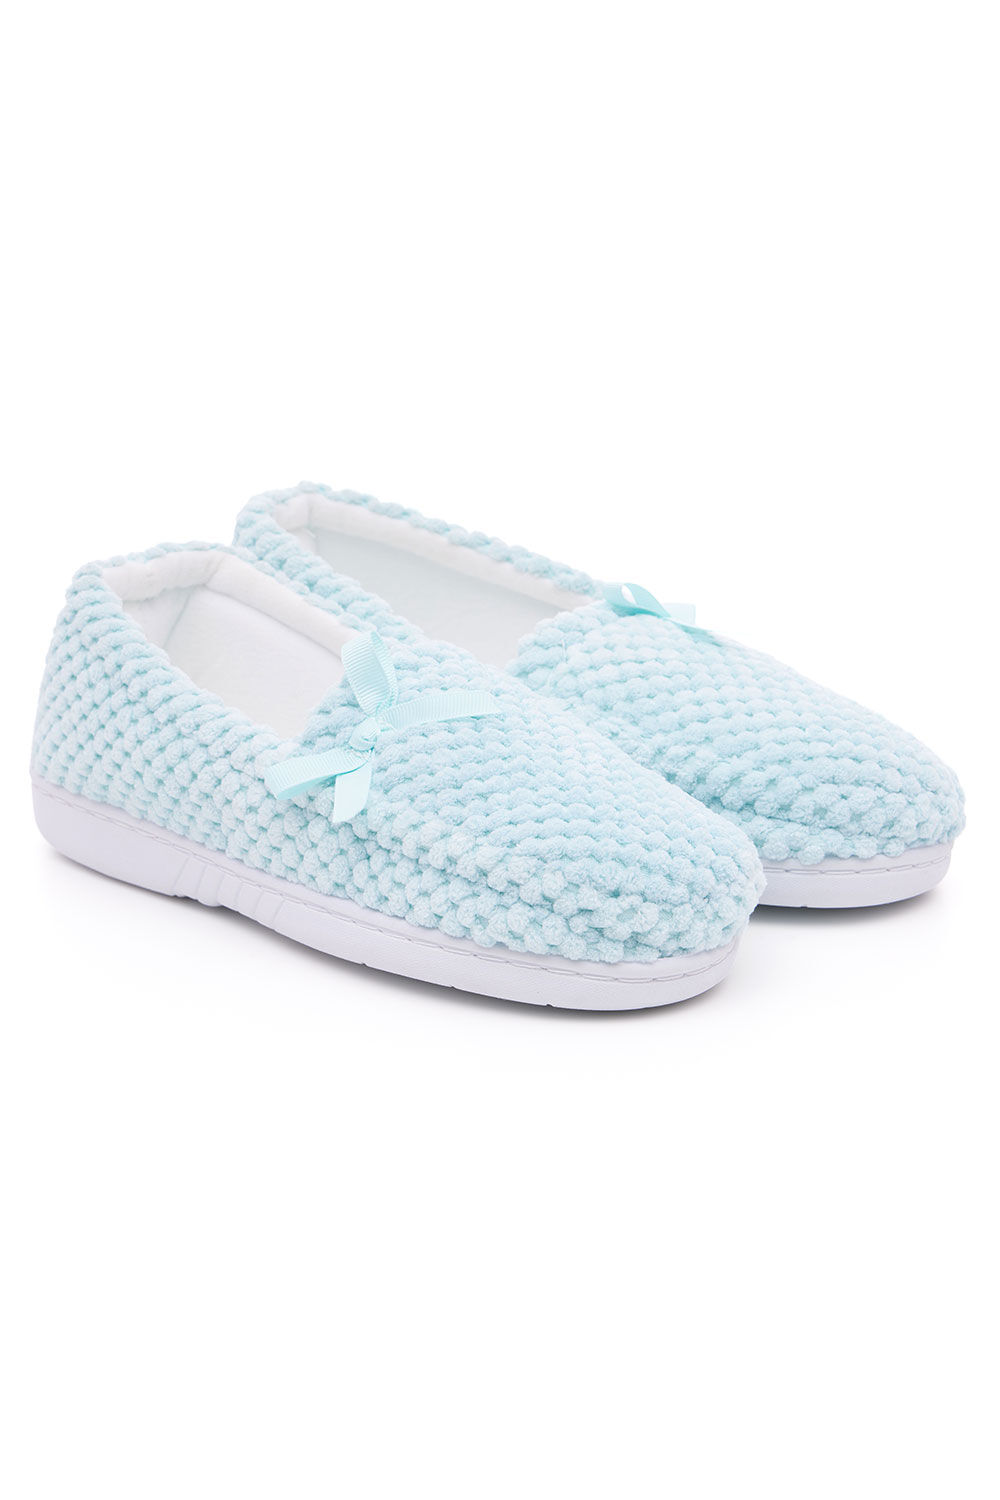 Bonmarche Blue Fleece Moccasin Slippers With Bow Detail, Size: 5